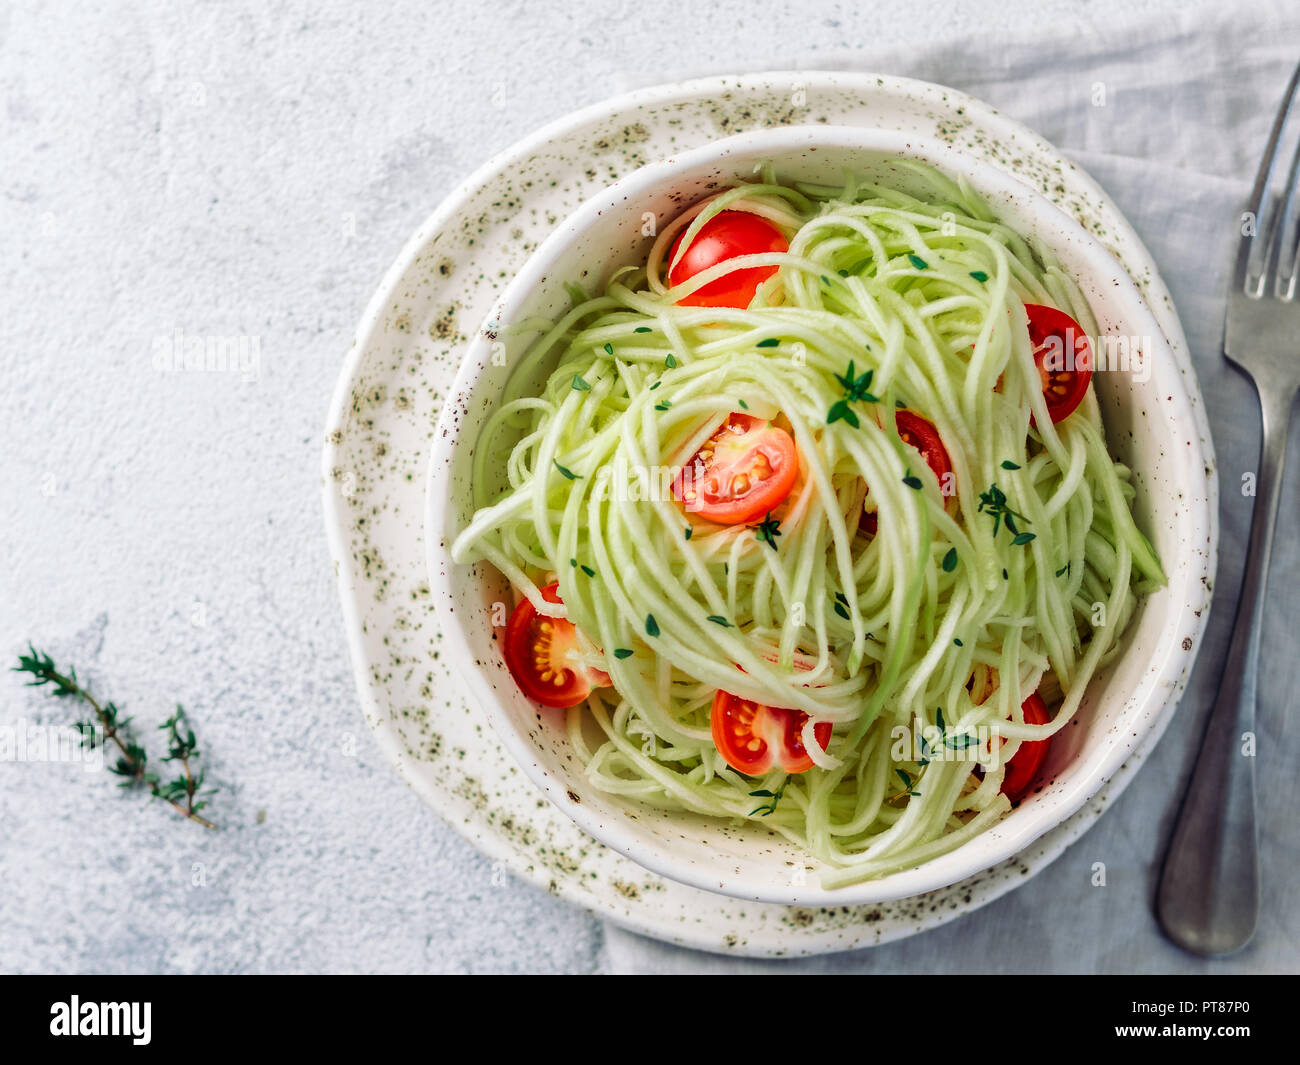 Zucchini noodles salad with cherry tomatoes. Vegetable noodles - green zoodles or courgette spaghetti salad ready-to-eat. Clean eating, raw vegetarian Stock Photo